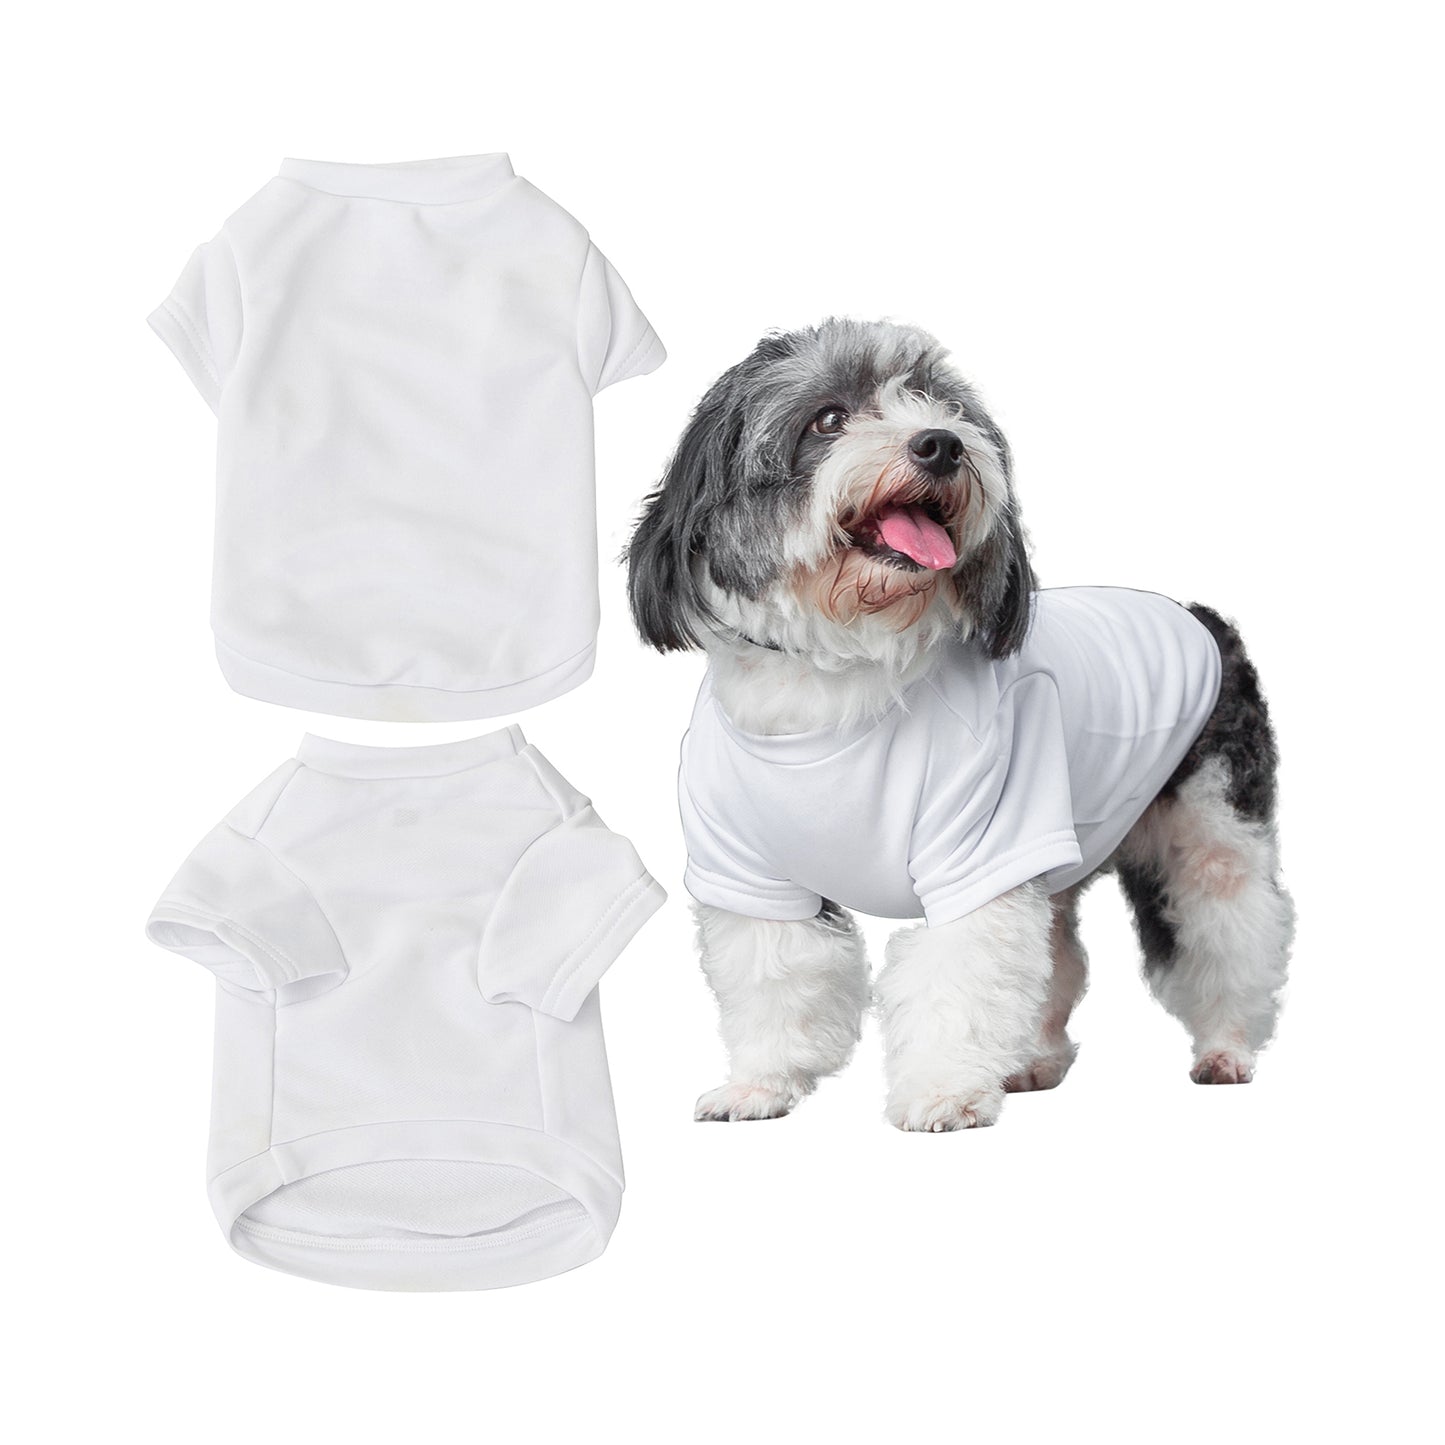 Craft Express 2 Pack of Large White Sublimation Pet T-Shirts